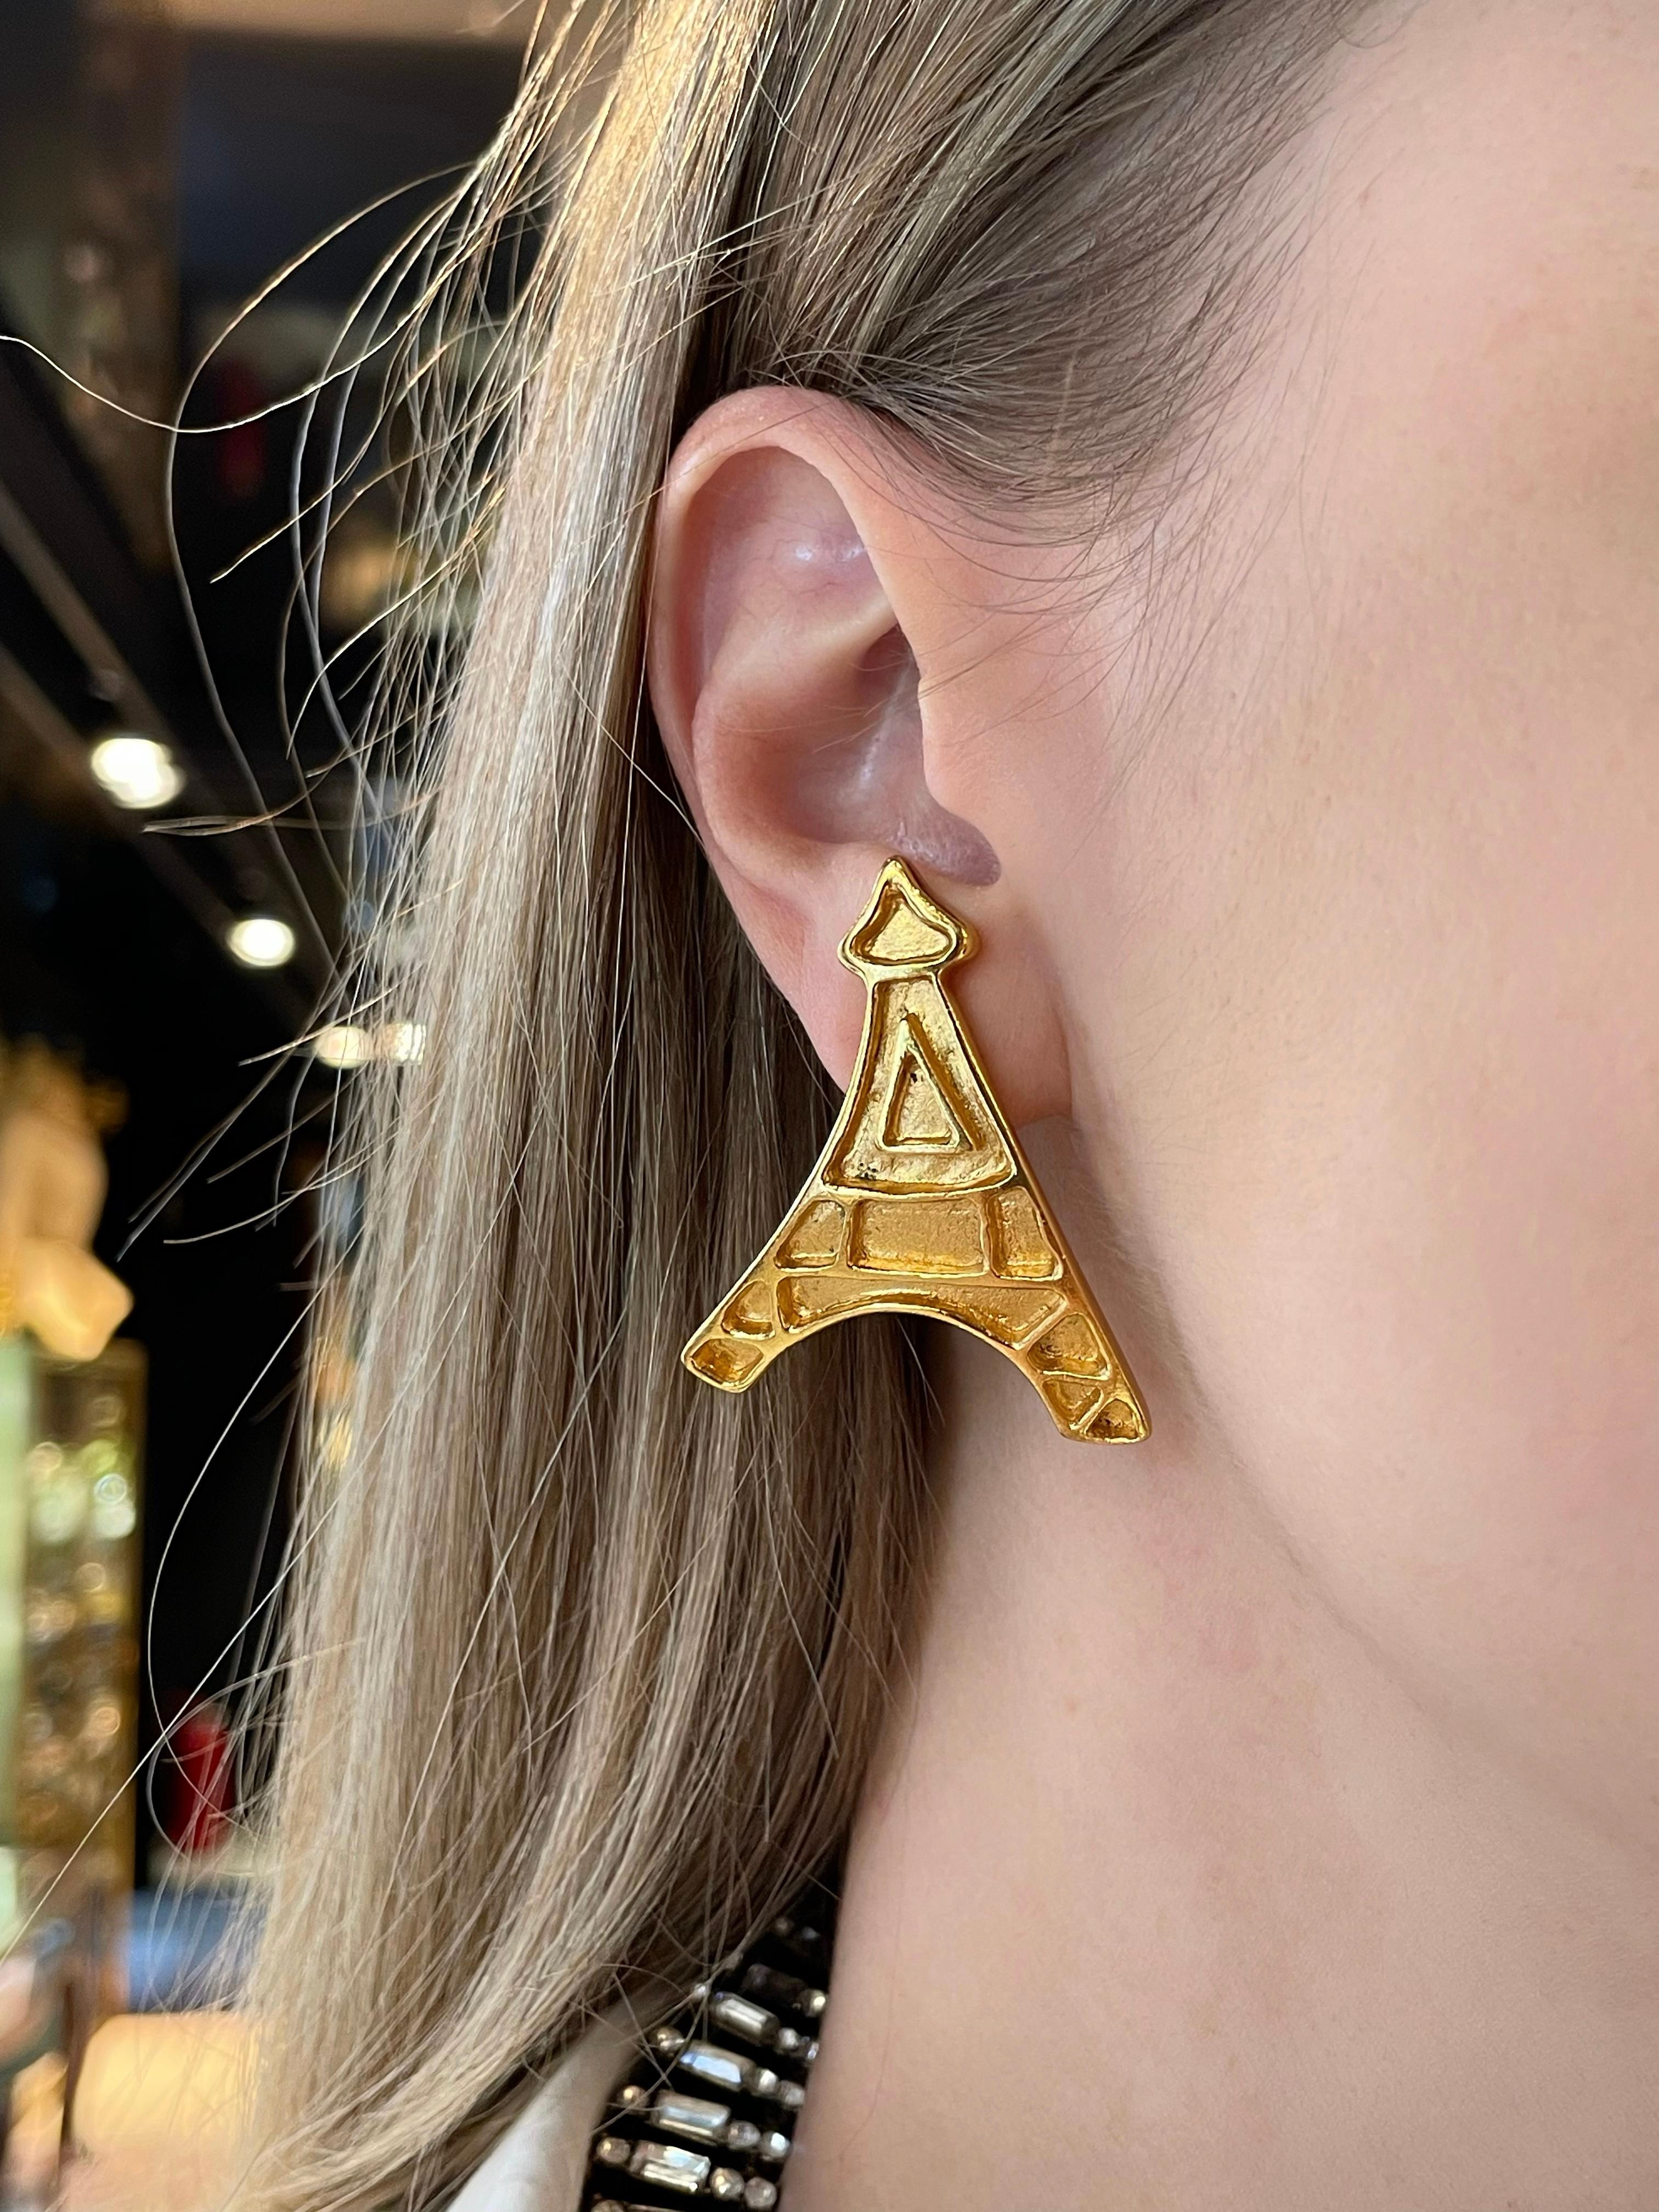 This is a pair of gold tone vintage clip-on earrings depicting the silhouette of the Eiffel tower. The piece is gold plated, designed by YSL in 1980’s.

Markings: “YSL. Made in France” (shown in photos).

Size: 4.4x3.4cm

———

If you have any